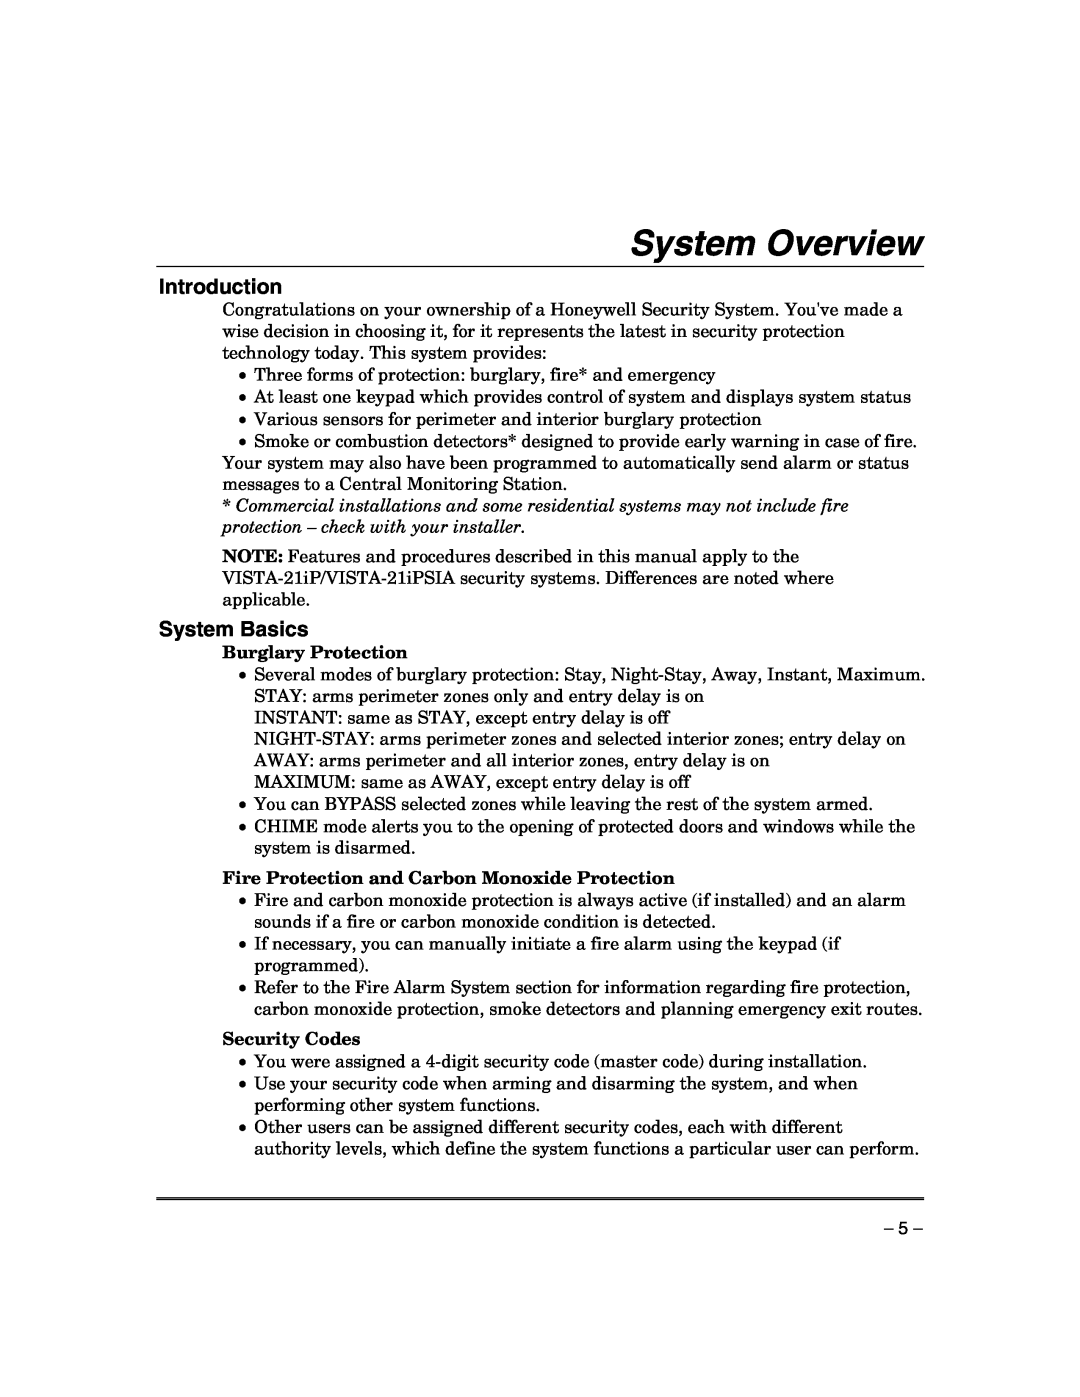 Honeywell VISTA-21IPSIA manual System Overview, Introduction, System Basics, Burglary Protection, Security Codes 